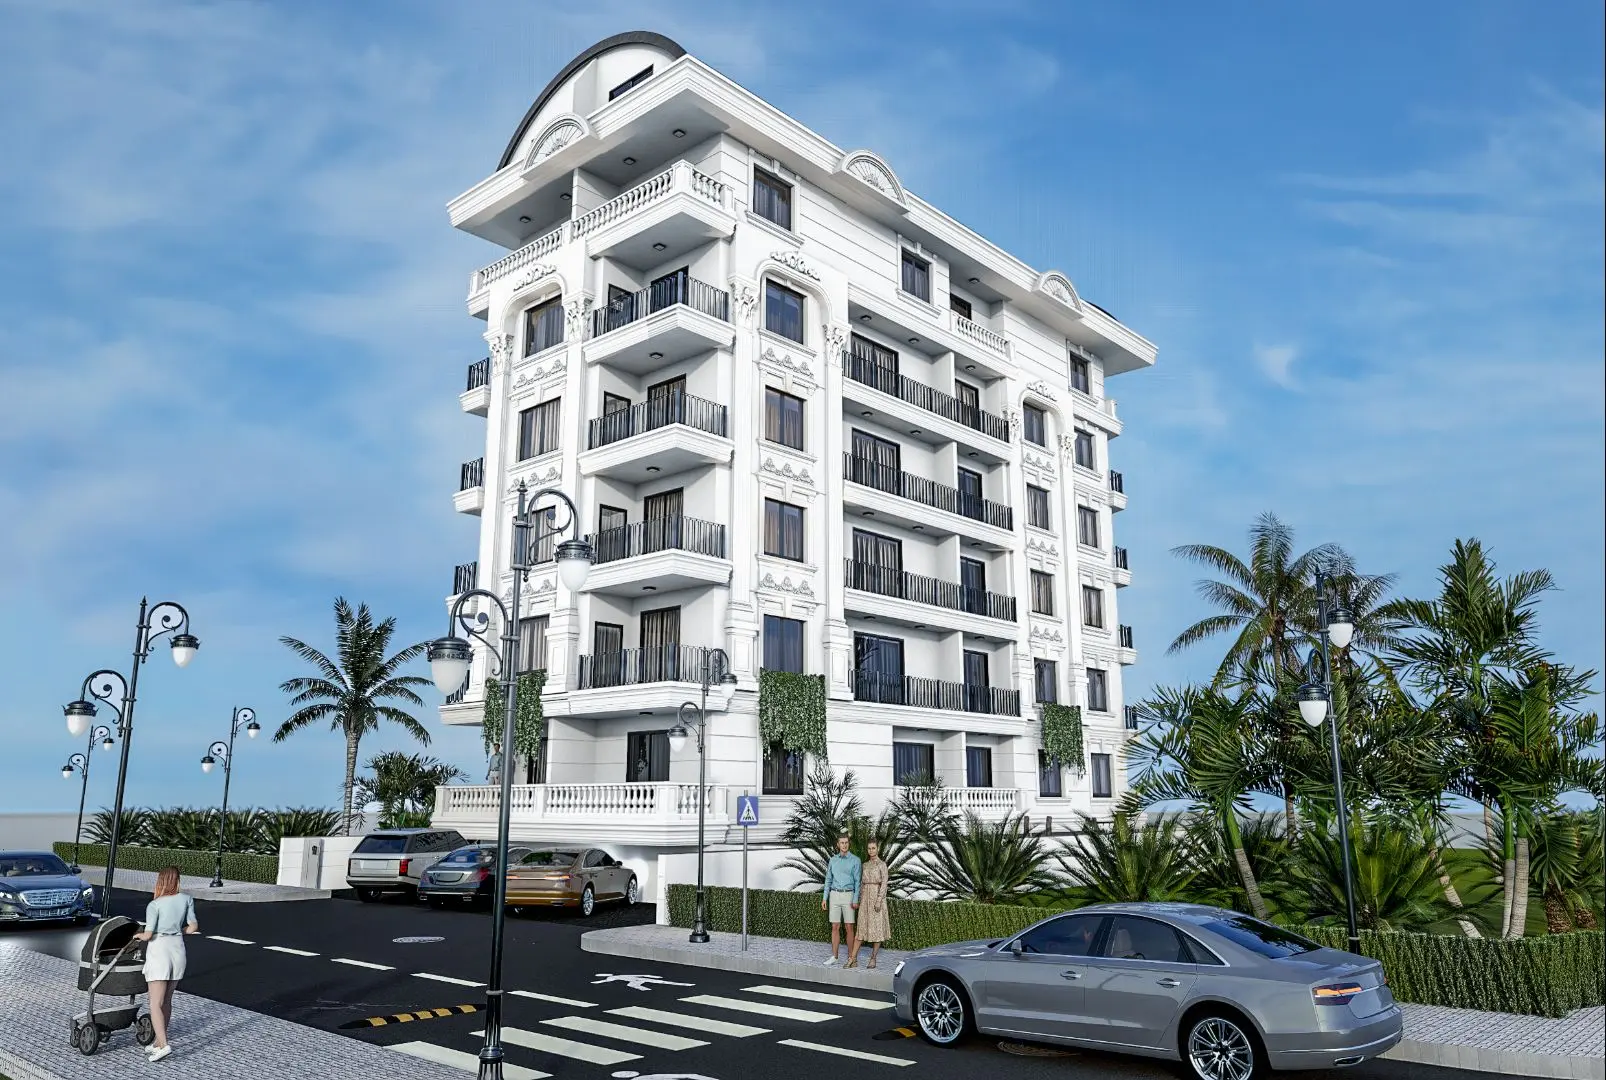 RESIDENTIAL COMPLEX PROJECT NEAR THE CLEOPATRA BEACH ALANYA